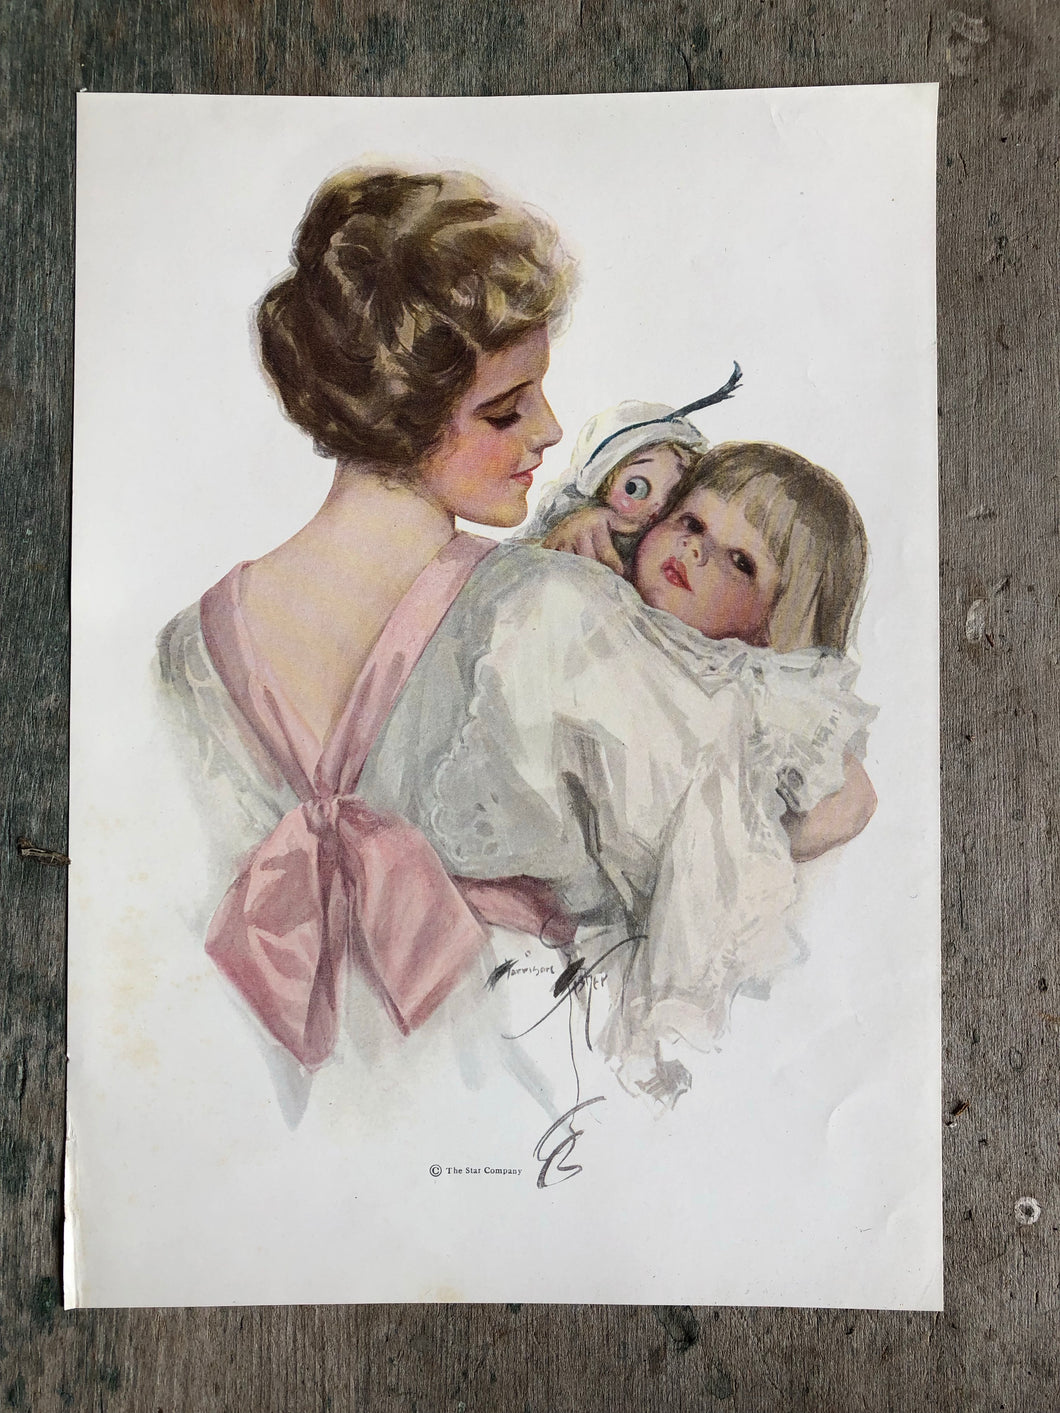 Print from Harrison Fisher Girls